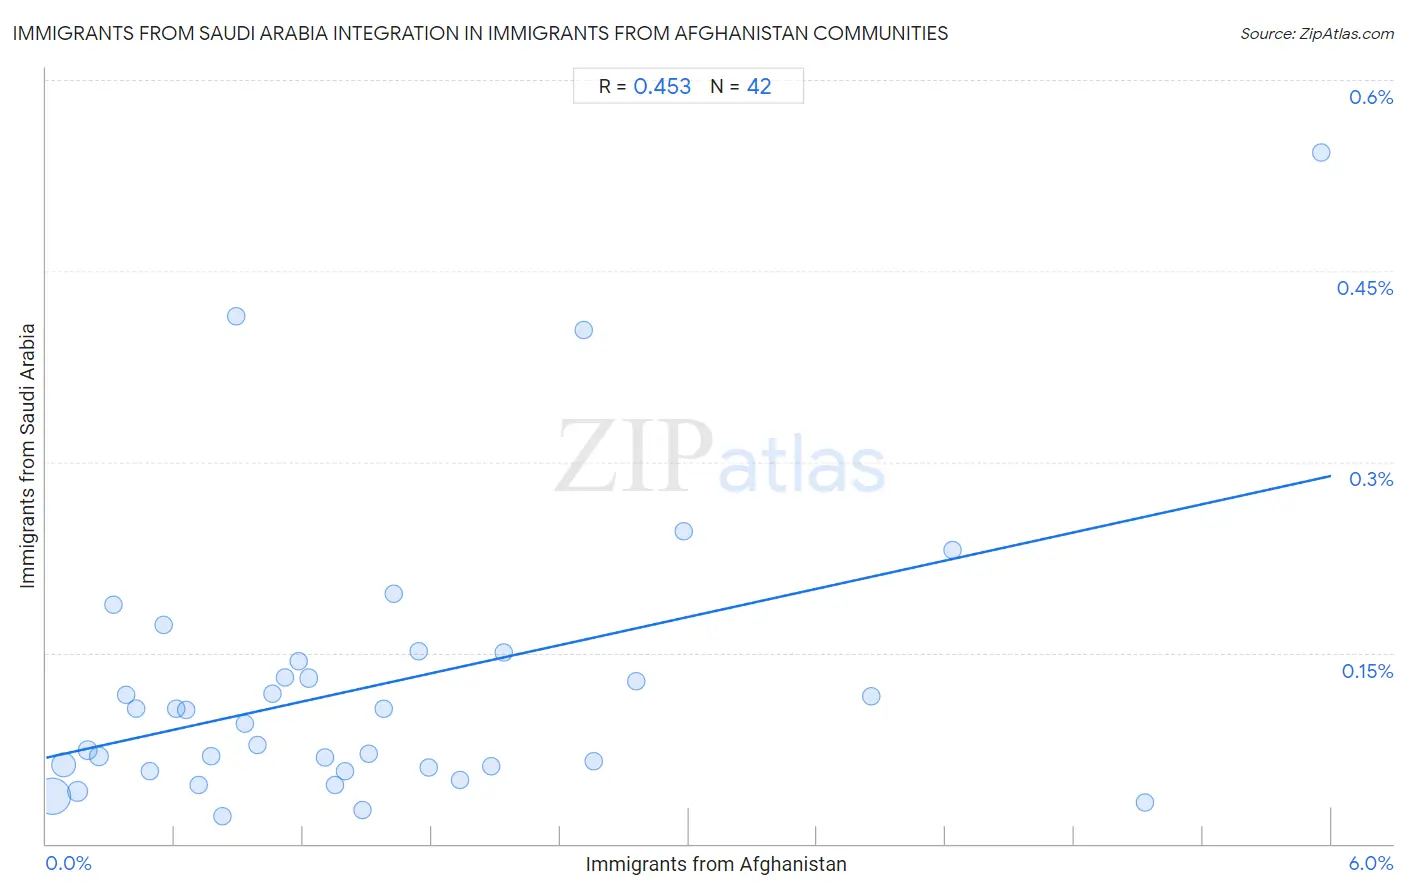 Immigrants from Afghanistan Integration in Immigrants from Saudi Arabia Communities